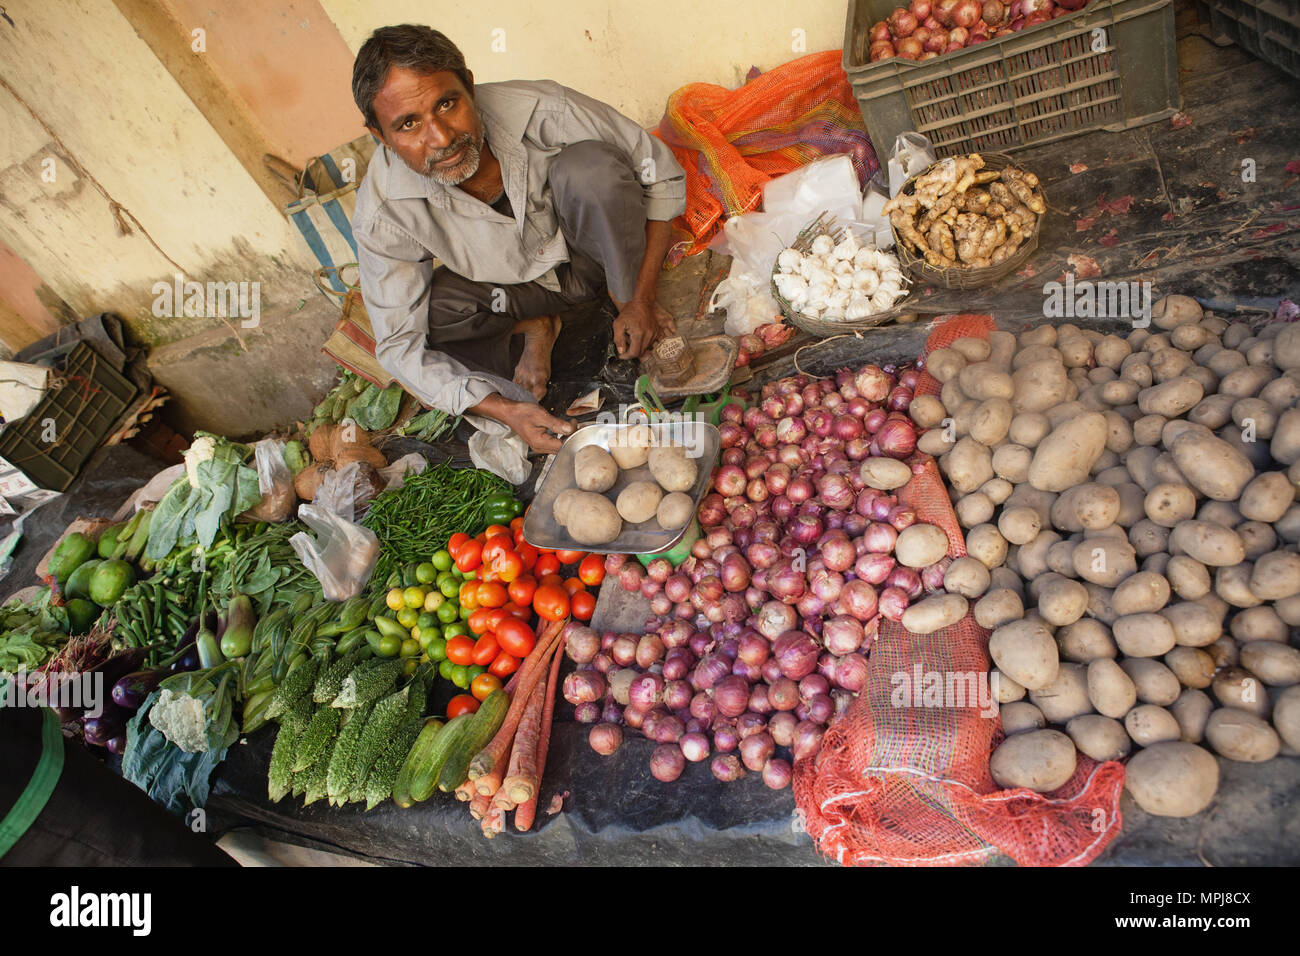 India, West Bengal, Kolkata, Vendor at the vegetable market in the Garia district. Stock Photo